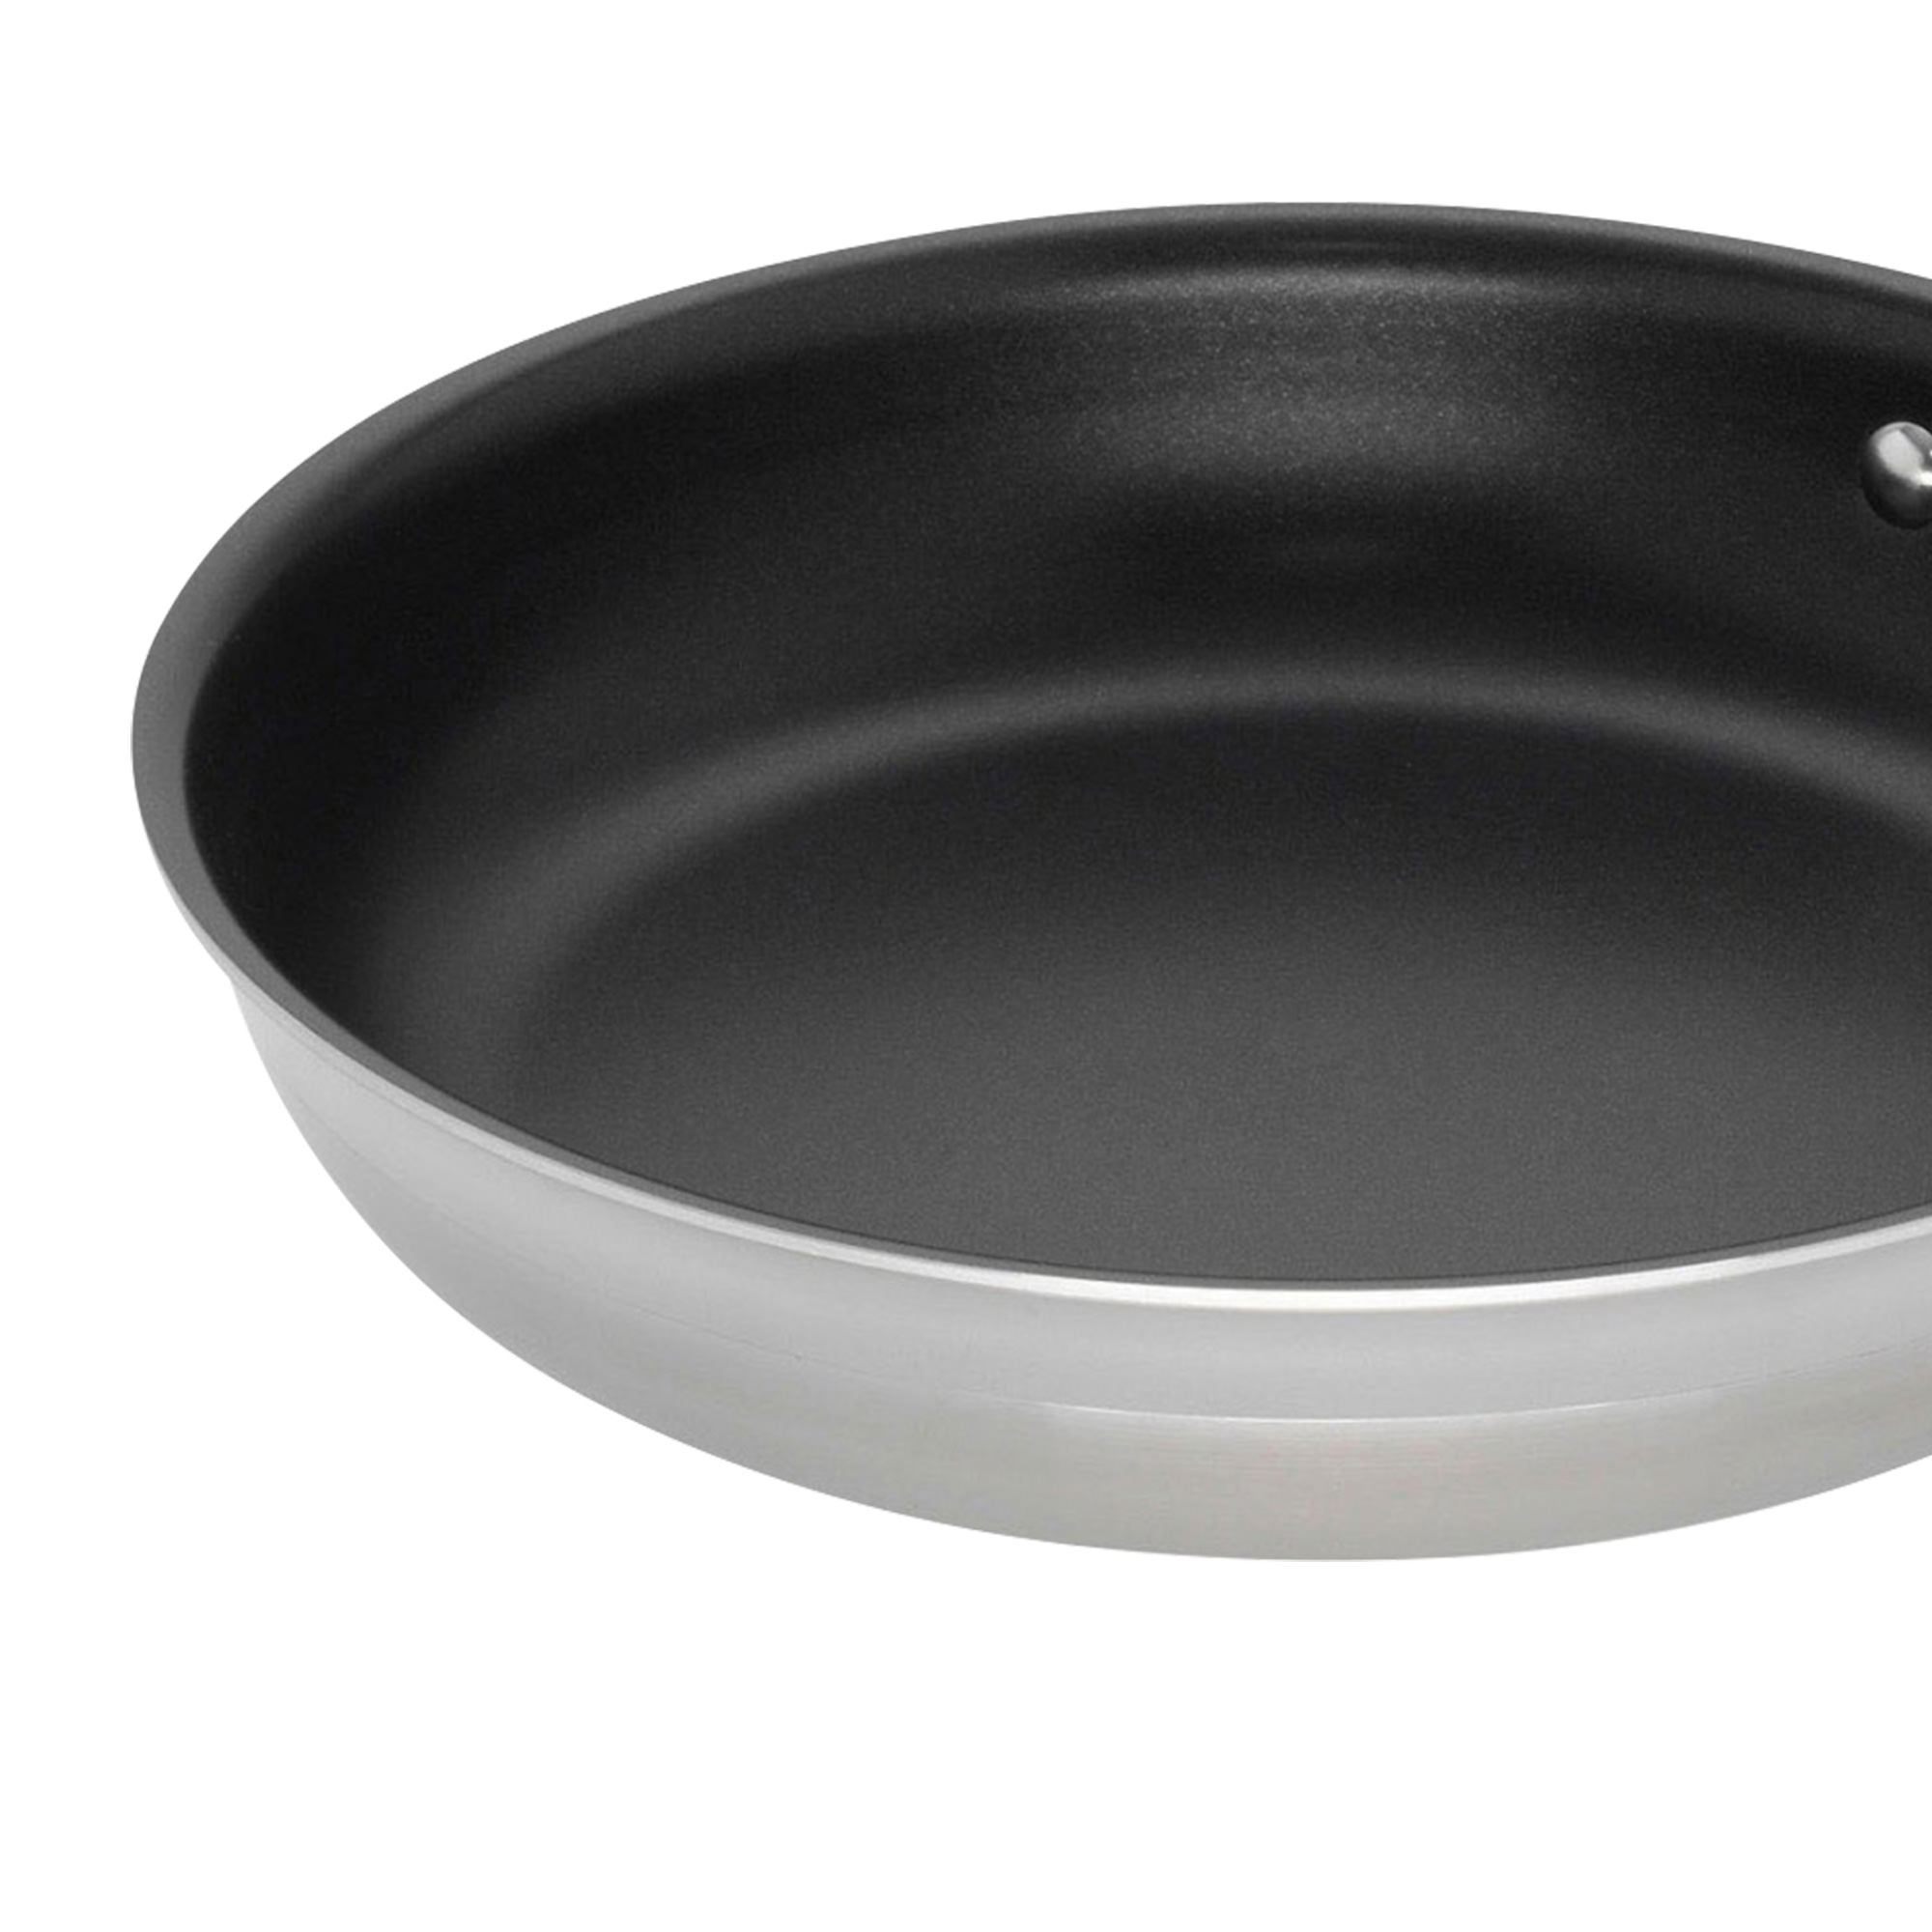 Le Creuset 3-Ply Stainless Steel Frypan 30cm Image 2